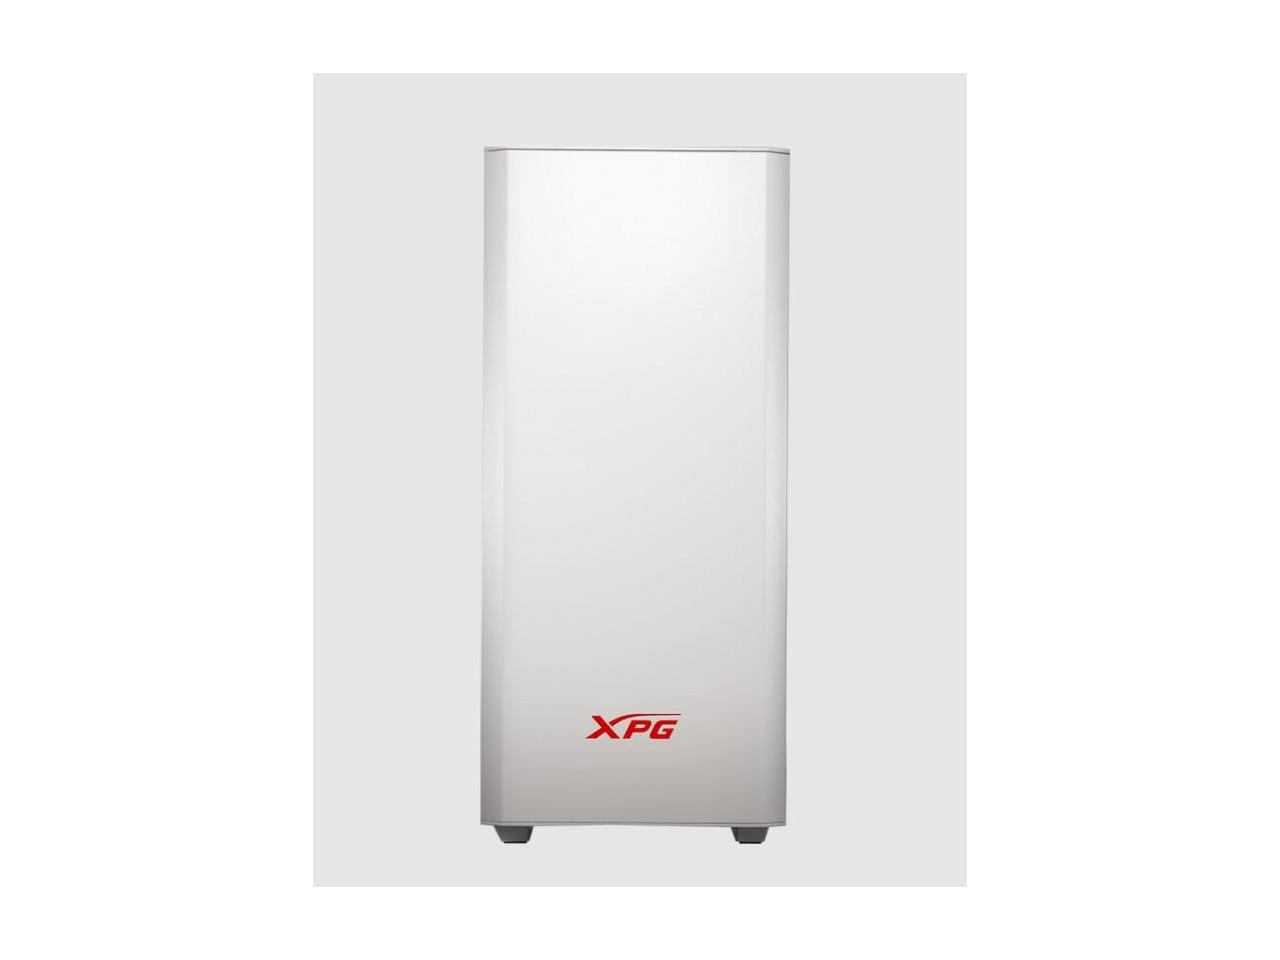 XPG INVADER ATX Mid Tower Chassis -White - INVADER-WHCWW - image 5 of 8